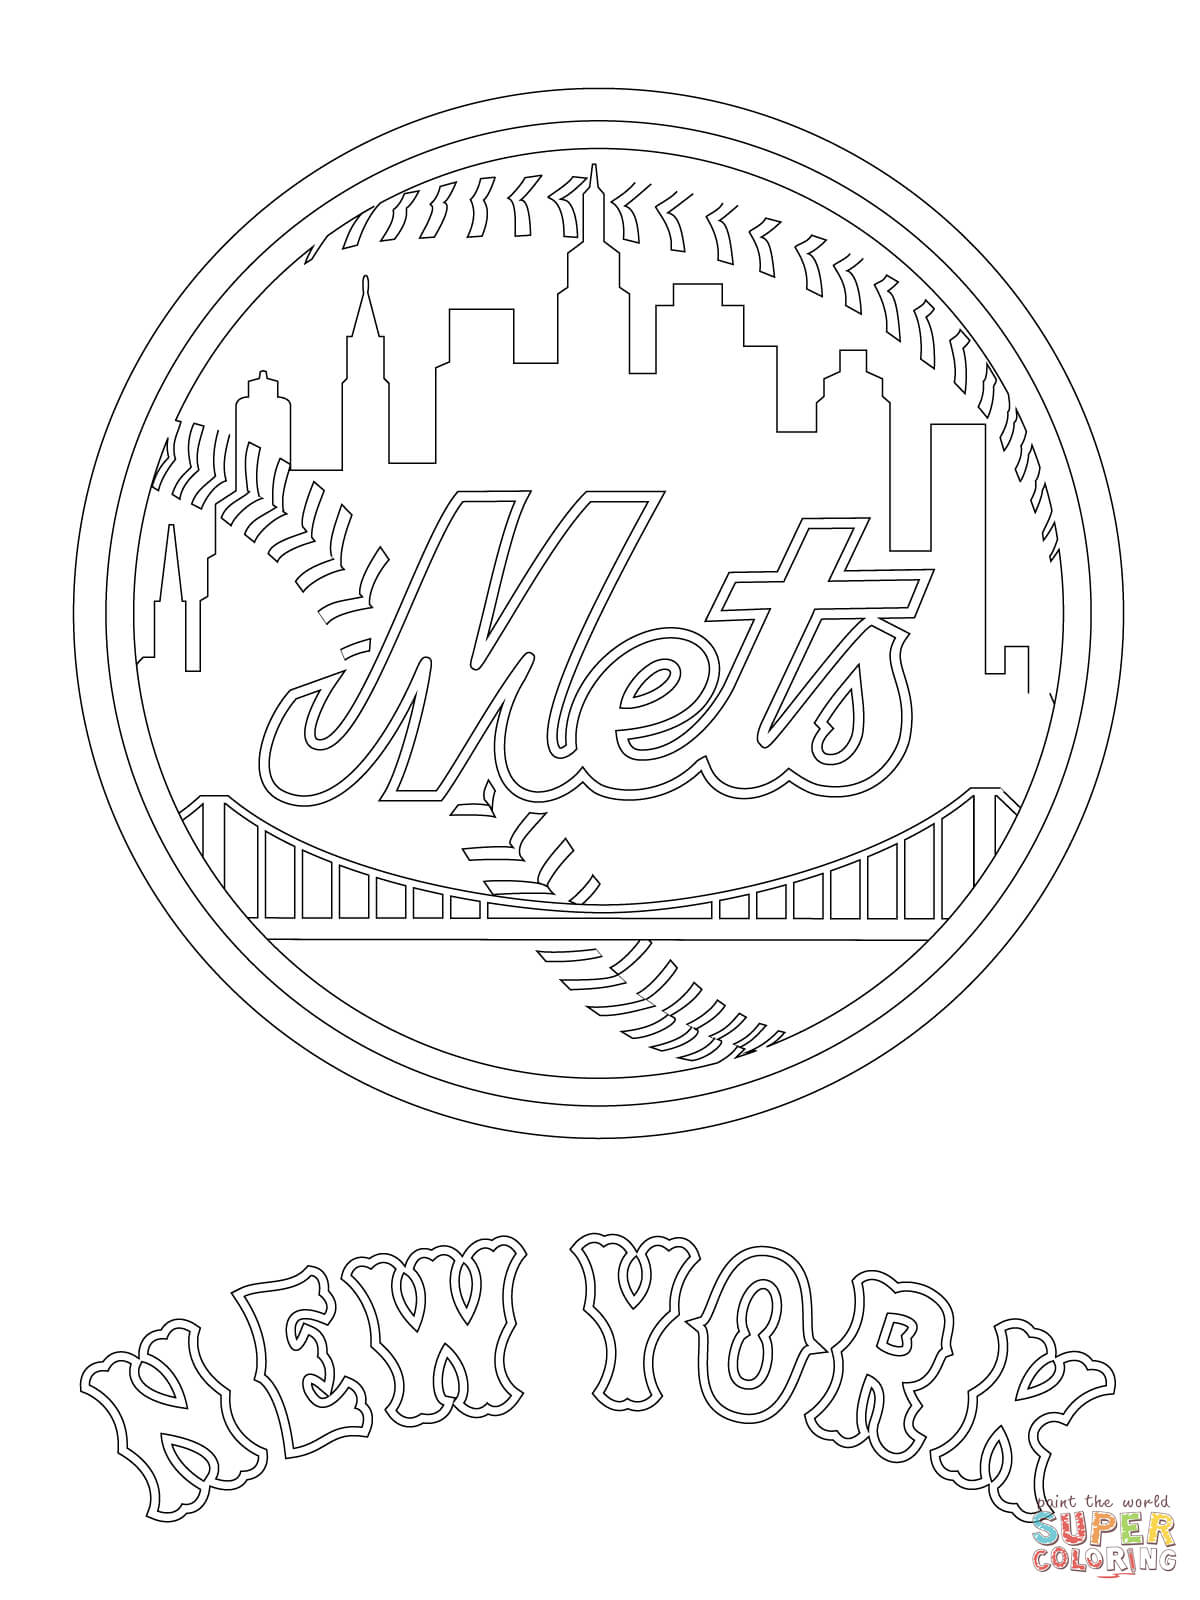 New York Mets Coloring Page